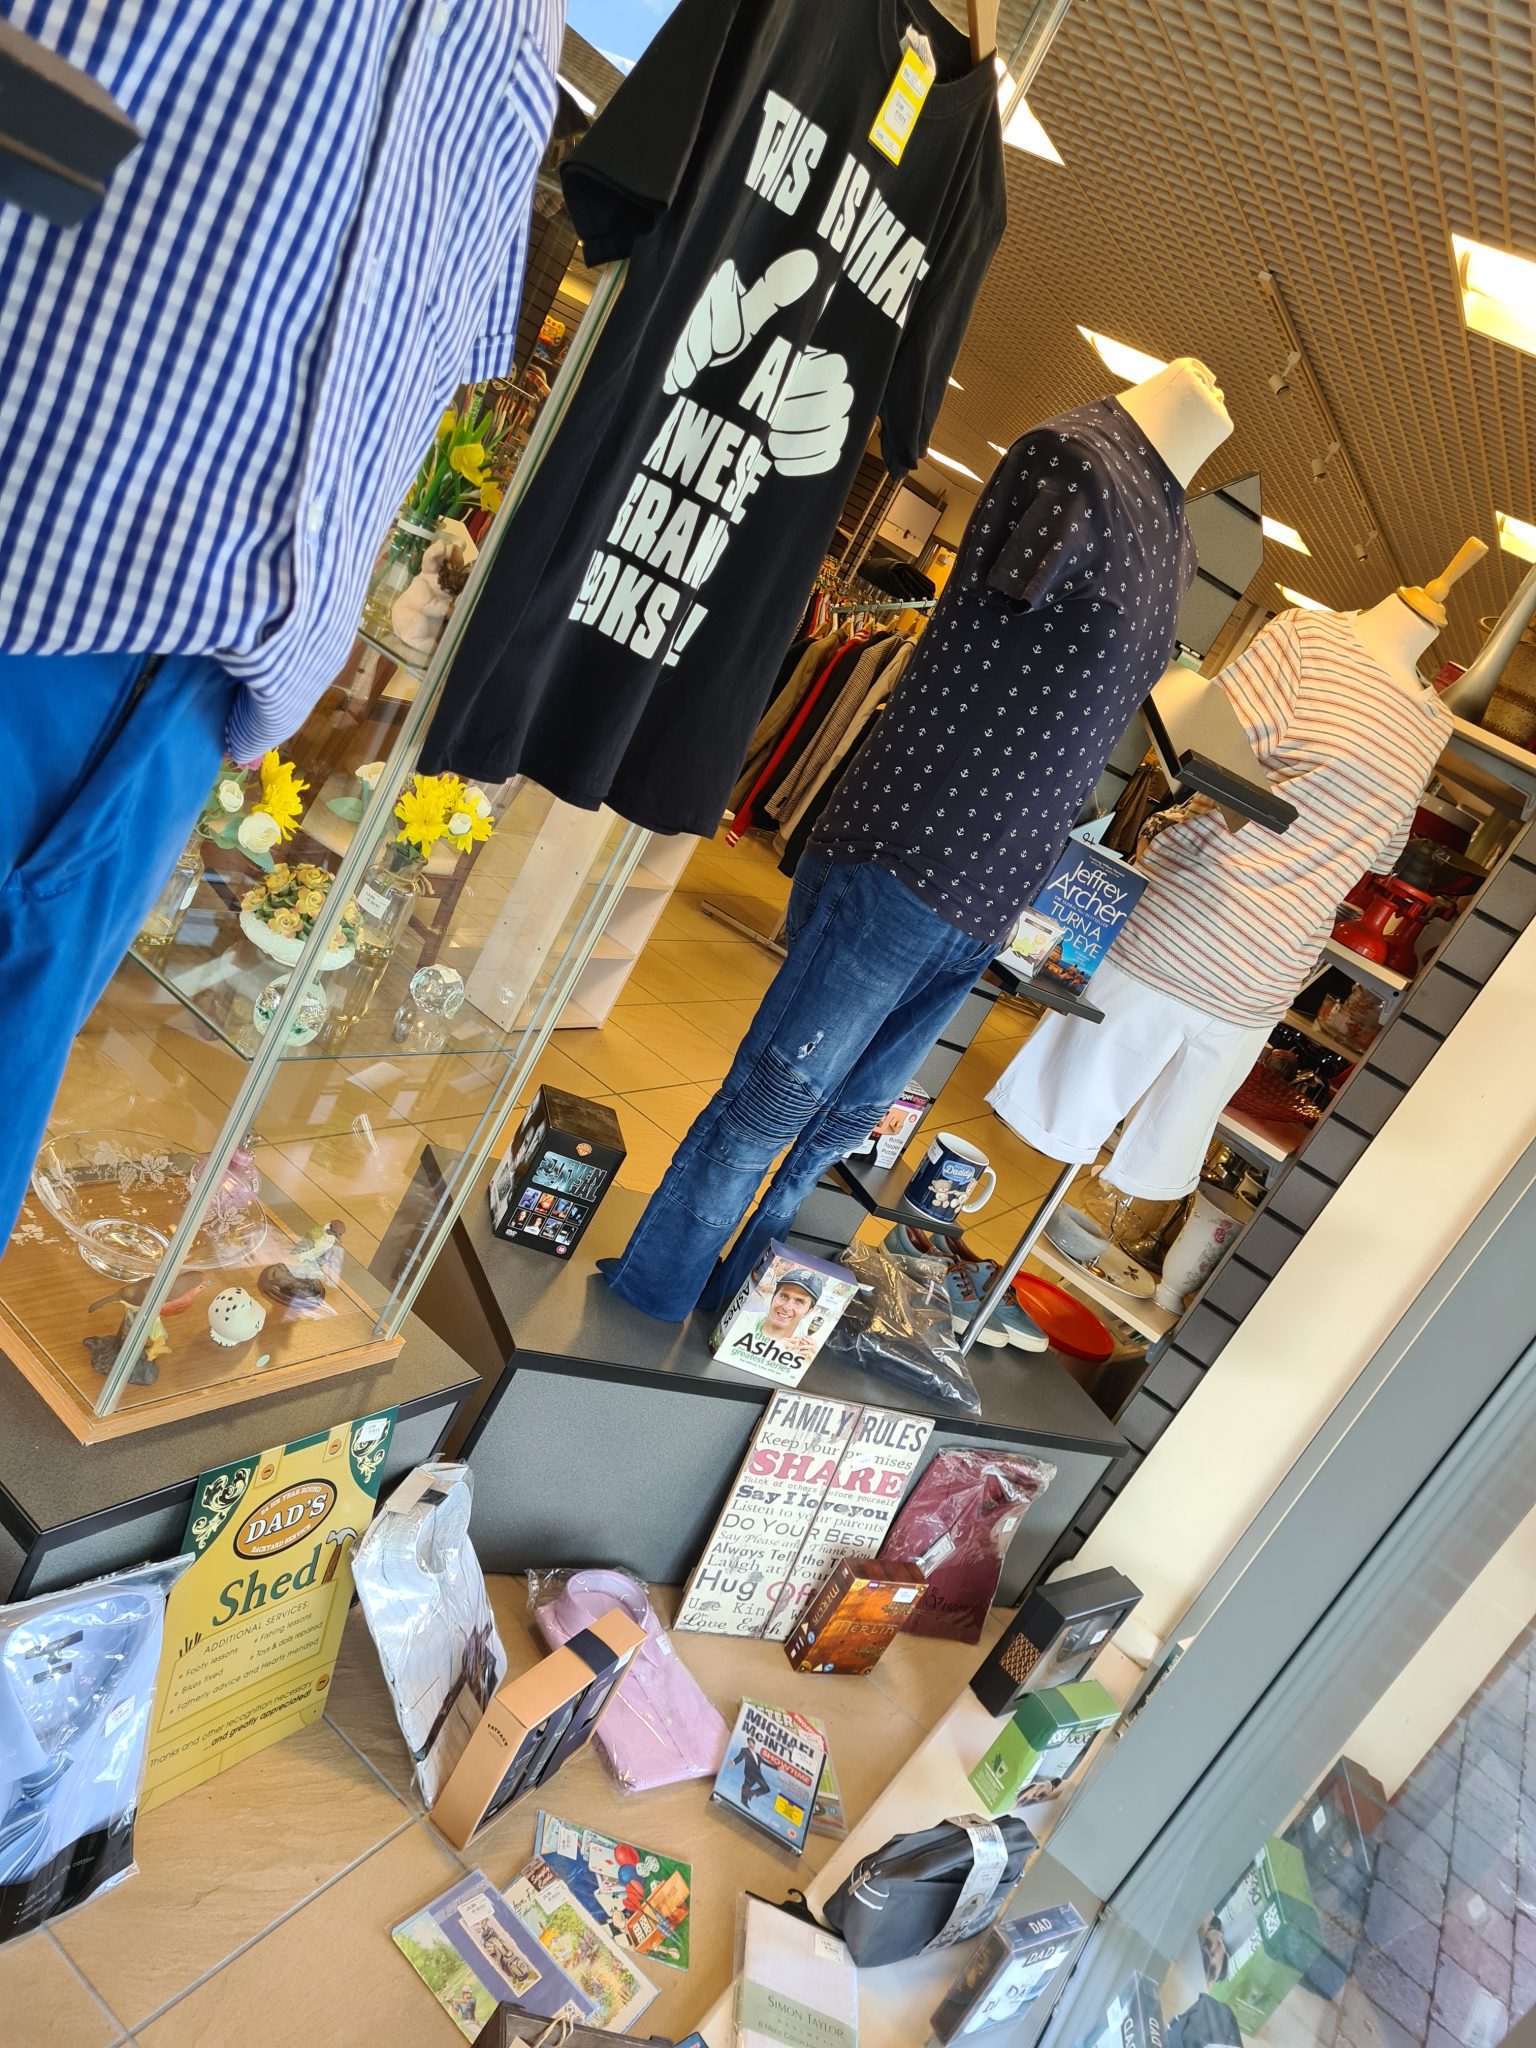 This shows a shop window with a Father's Day display put together by Alison. There's four mannequins all wearing mens clothing and other gifts on the floor including mugs, dvds and dad's shed signs. 